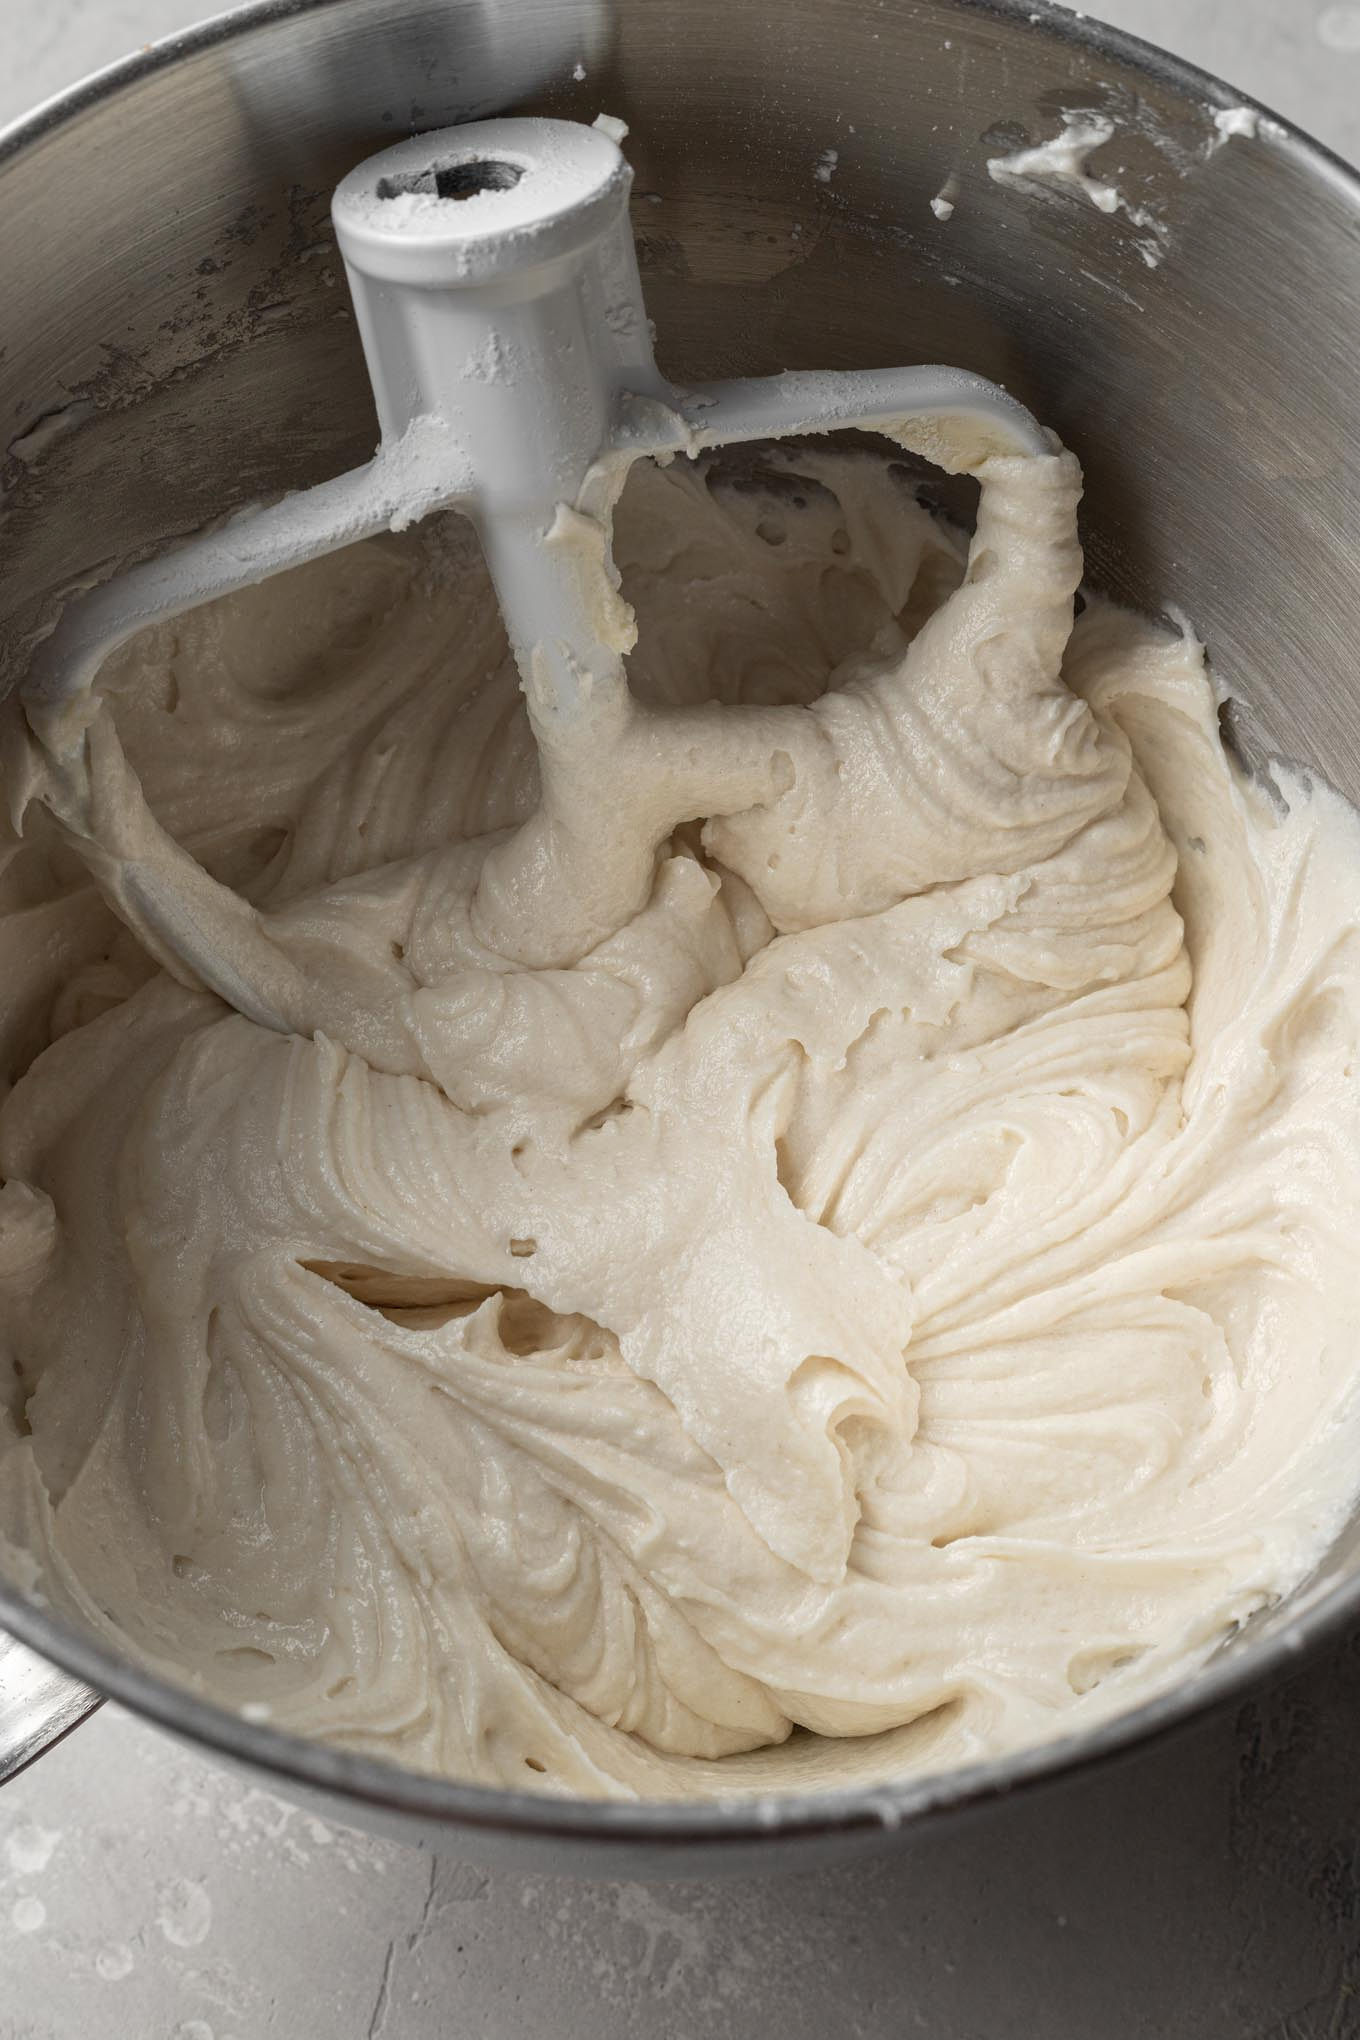 An overhead view of white cake batter in a stand mixer.